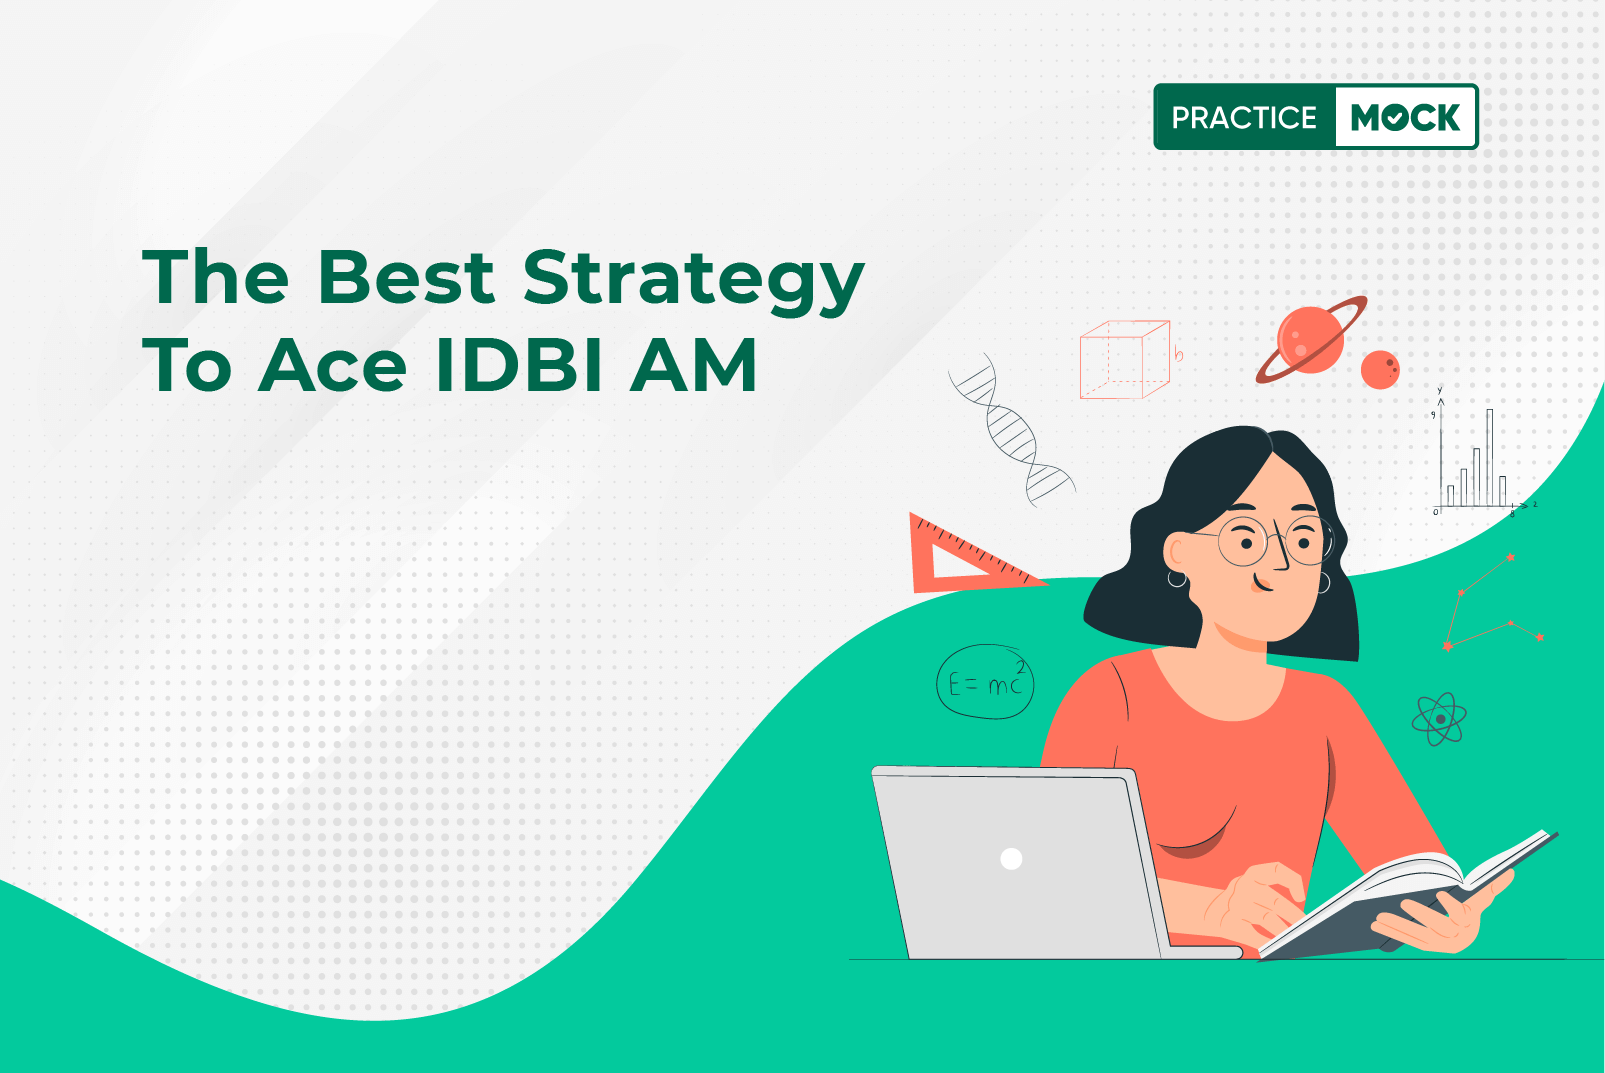 The Best Strategy to ace IDBI AM